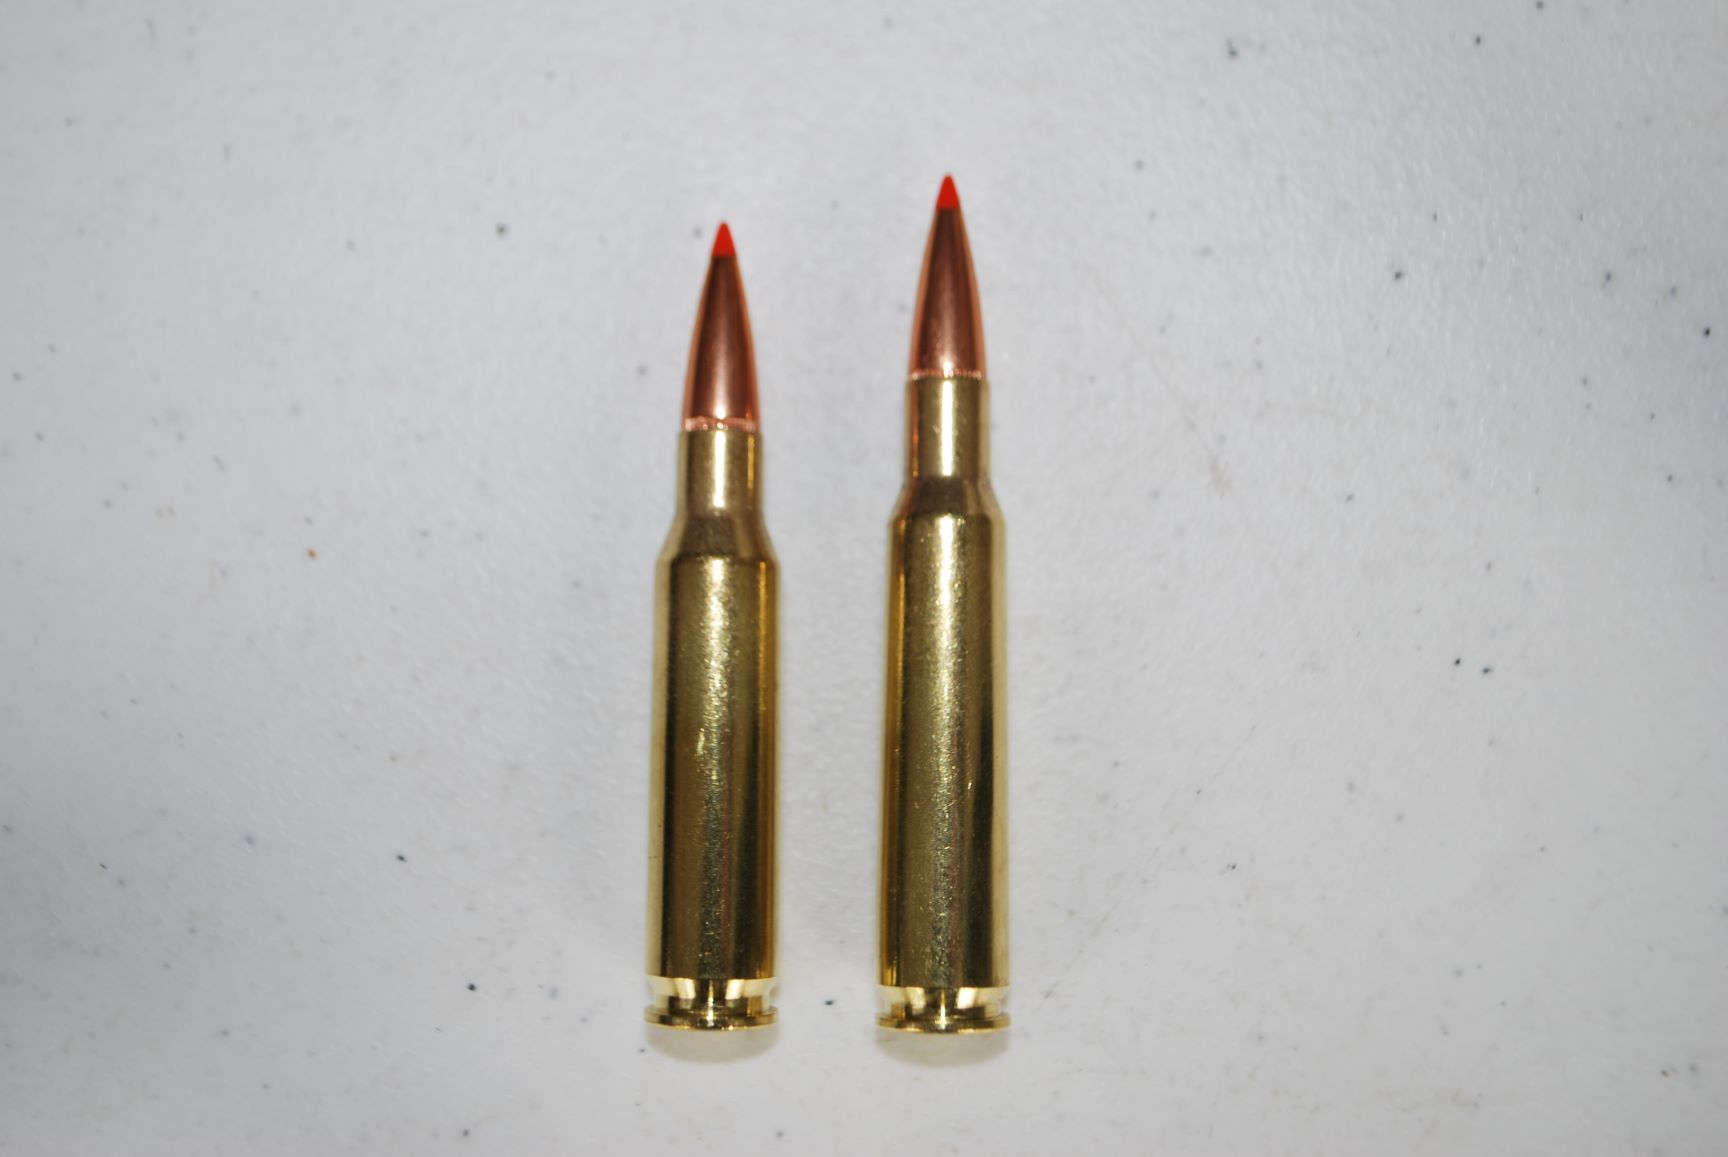 The 7mm-08 Remington with its much older ballistic twin, the 7x57mm Mauser. With greater case capacity, the 7x57 should be faster, but the two cartridges are loaded to different pressure levels. So, in all ways except for tradition, the 7mm-08 is the better of the two cartridges.